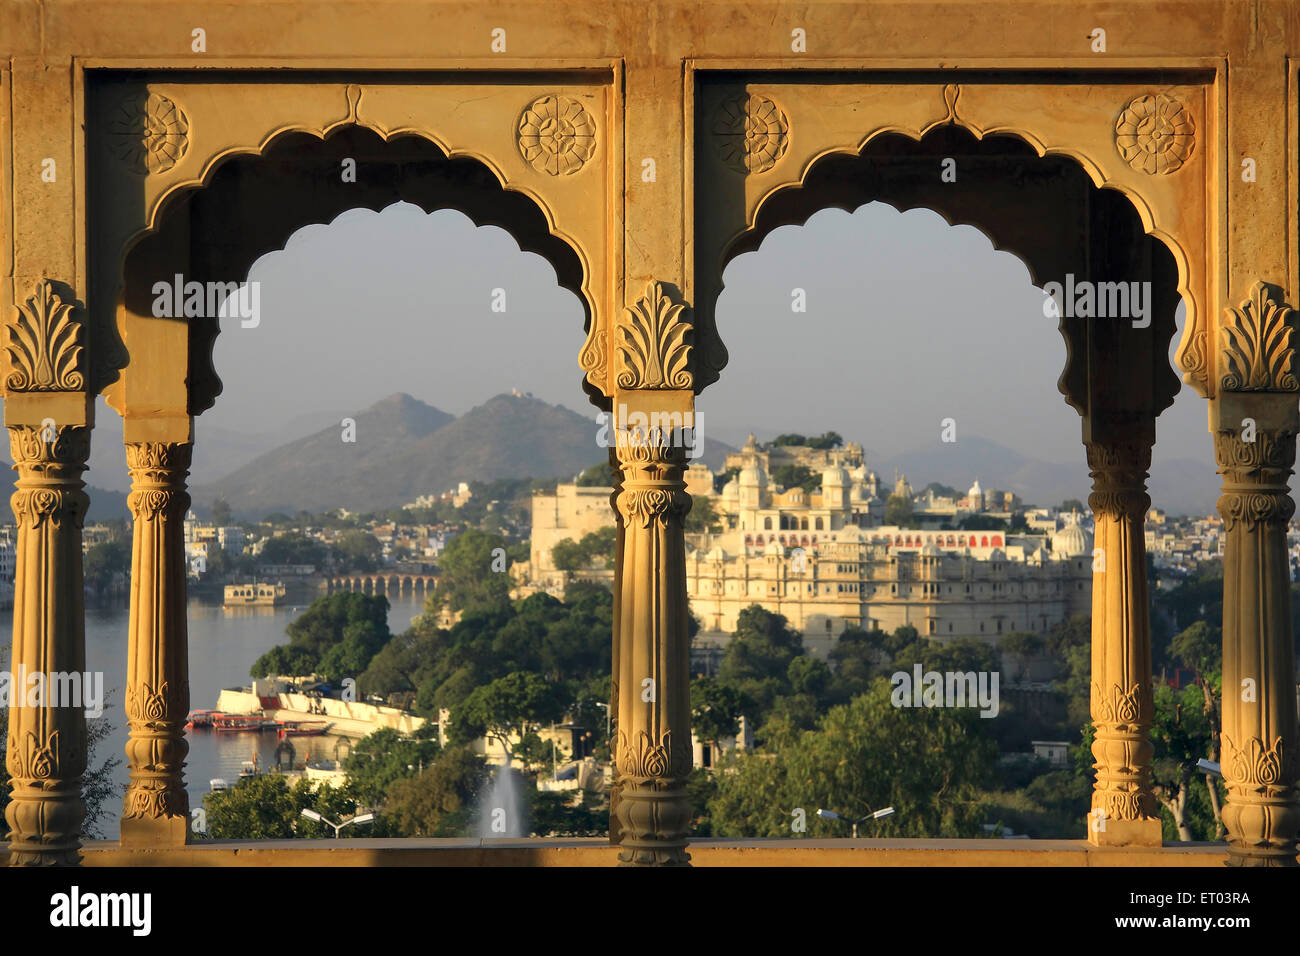 City Palace , Udaipur , Rajasthan , Inde , Asie Banque D'Images